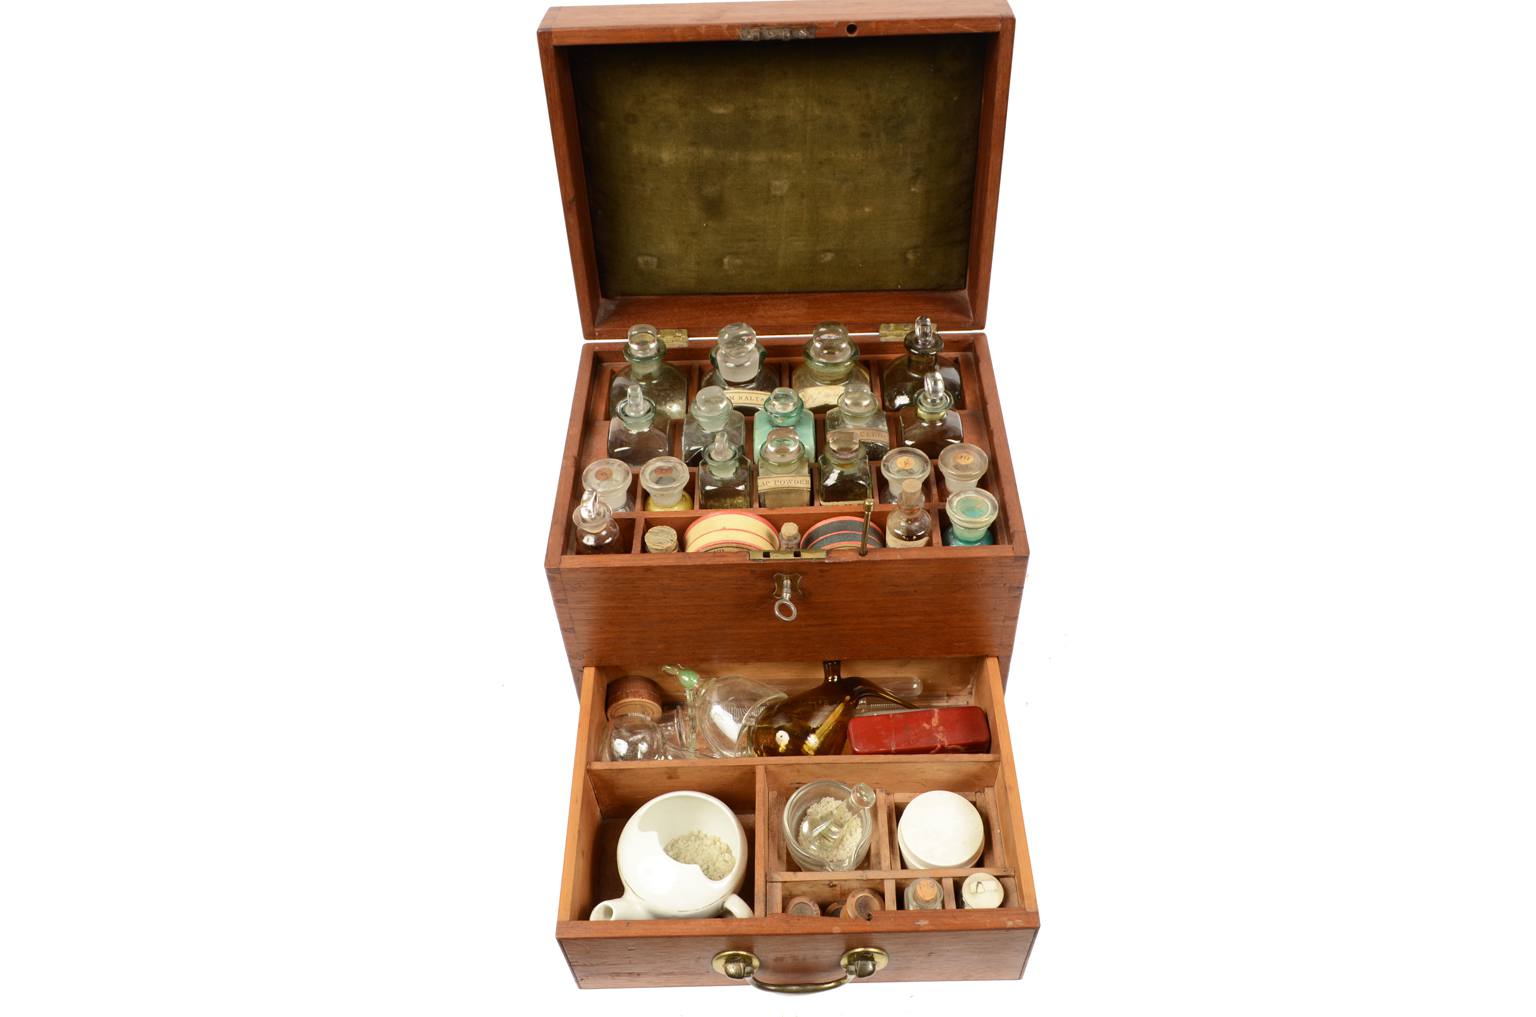 e-Shop/Old medical instruments/Code 2686 English apothecary kit